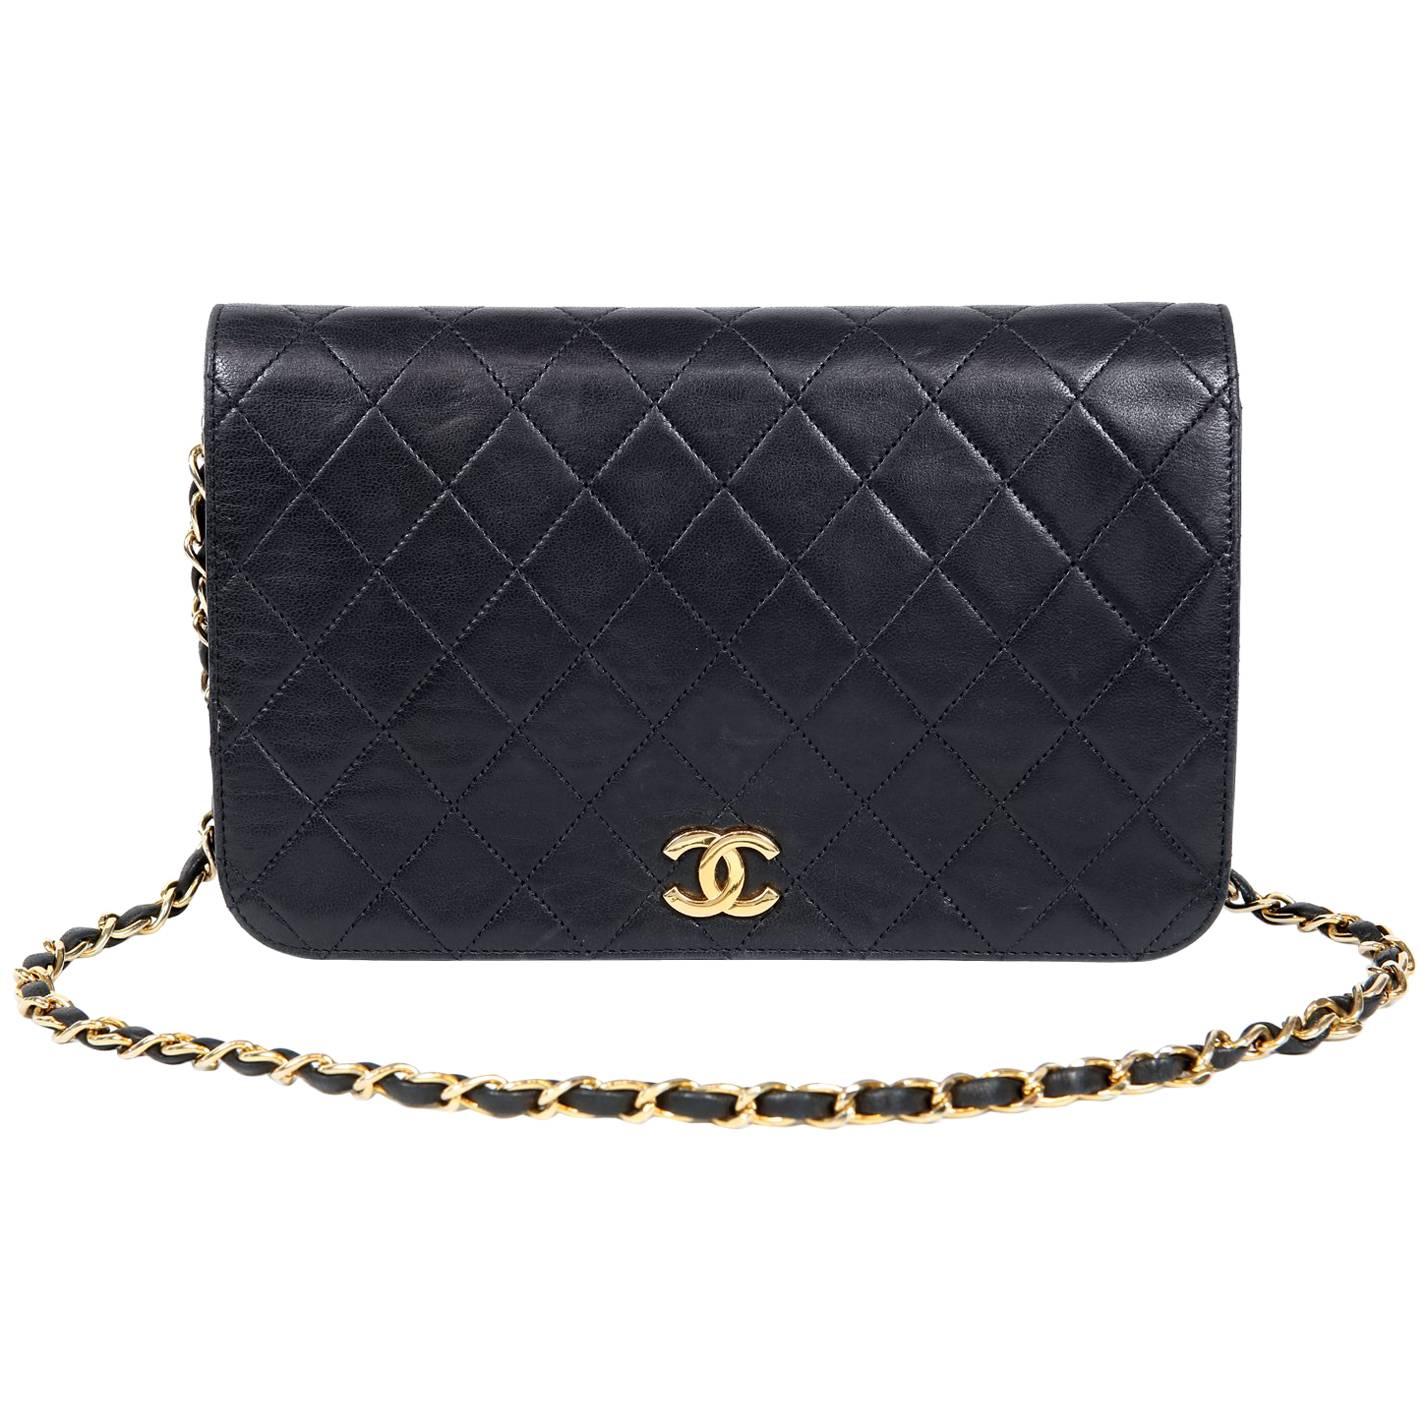 Chanel Black Leather Vintage Clutch with Strap